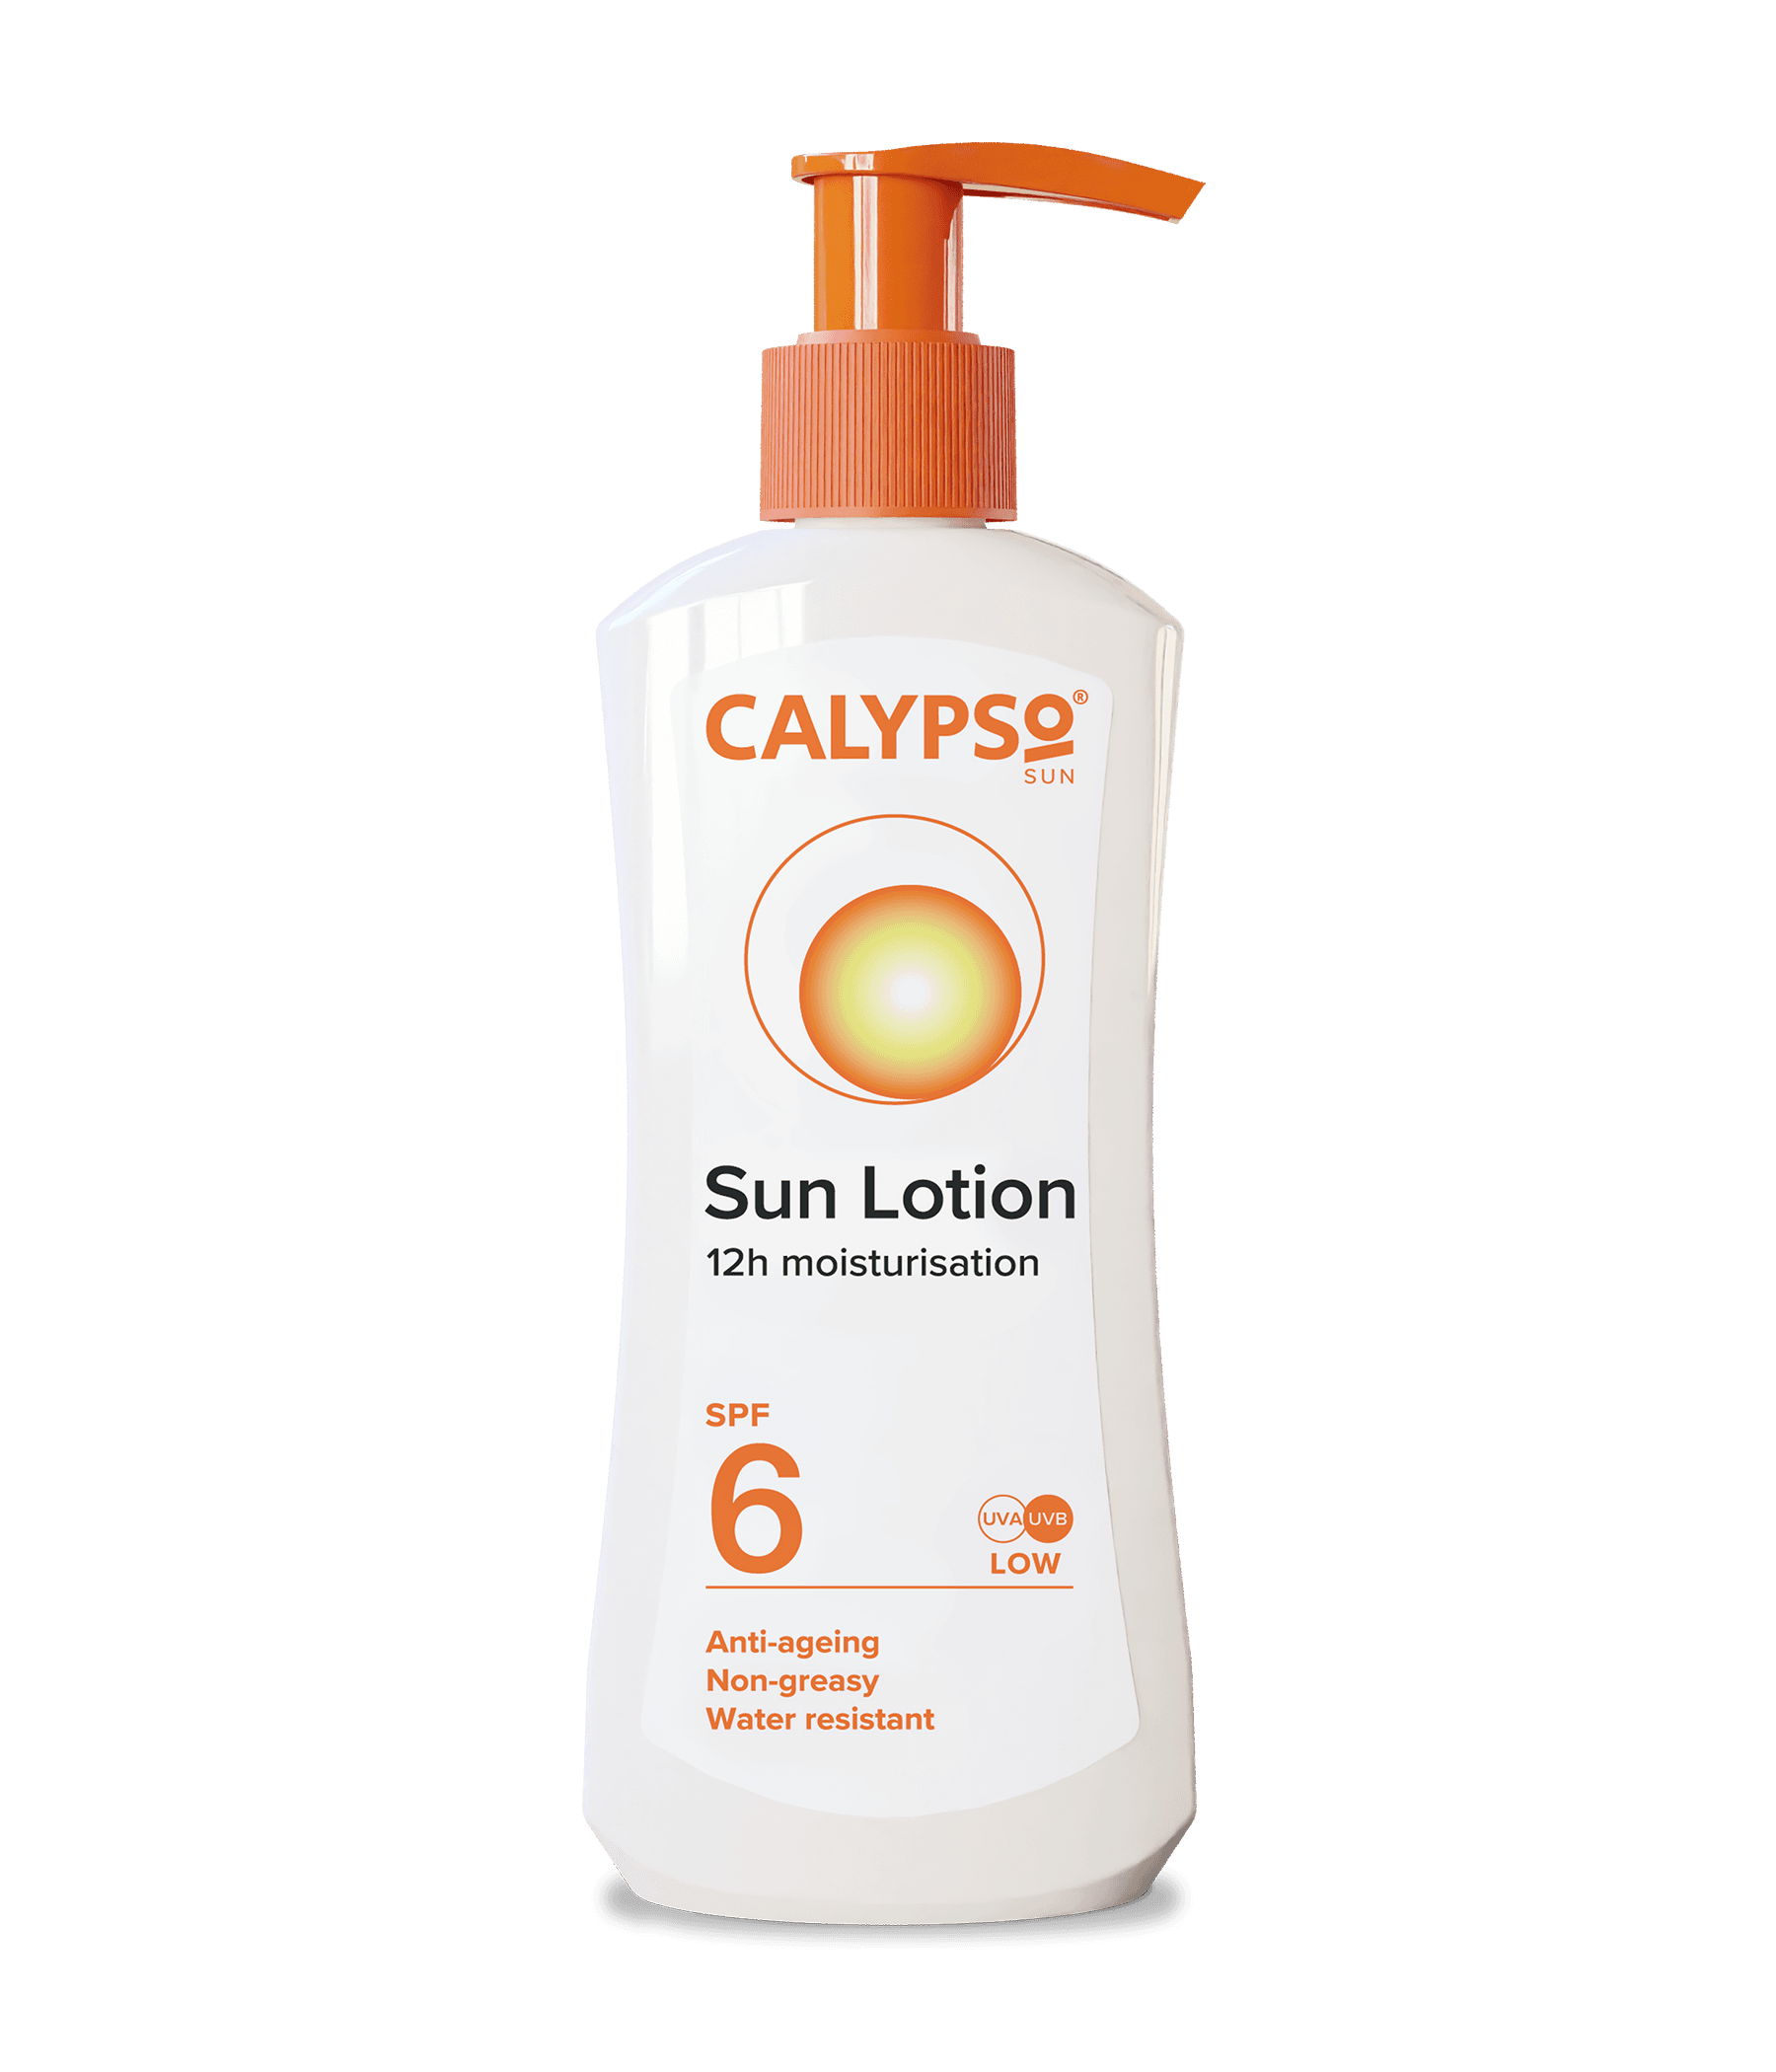 Calypso Press and Protect Sun Lotion SPF 6 for Low Protection front